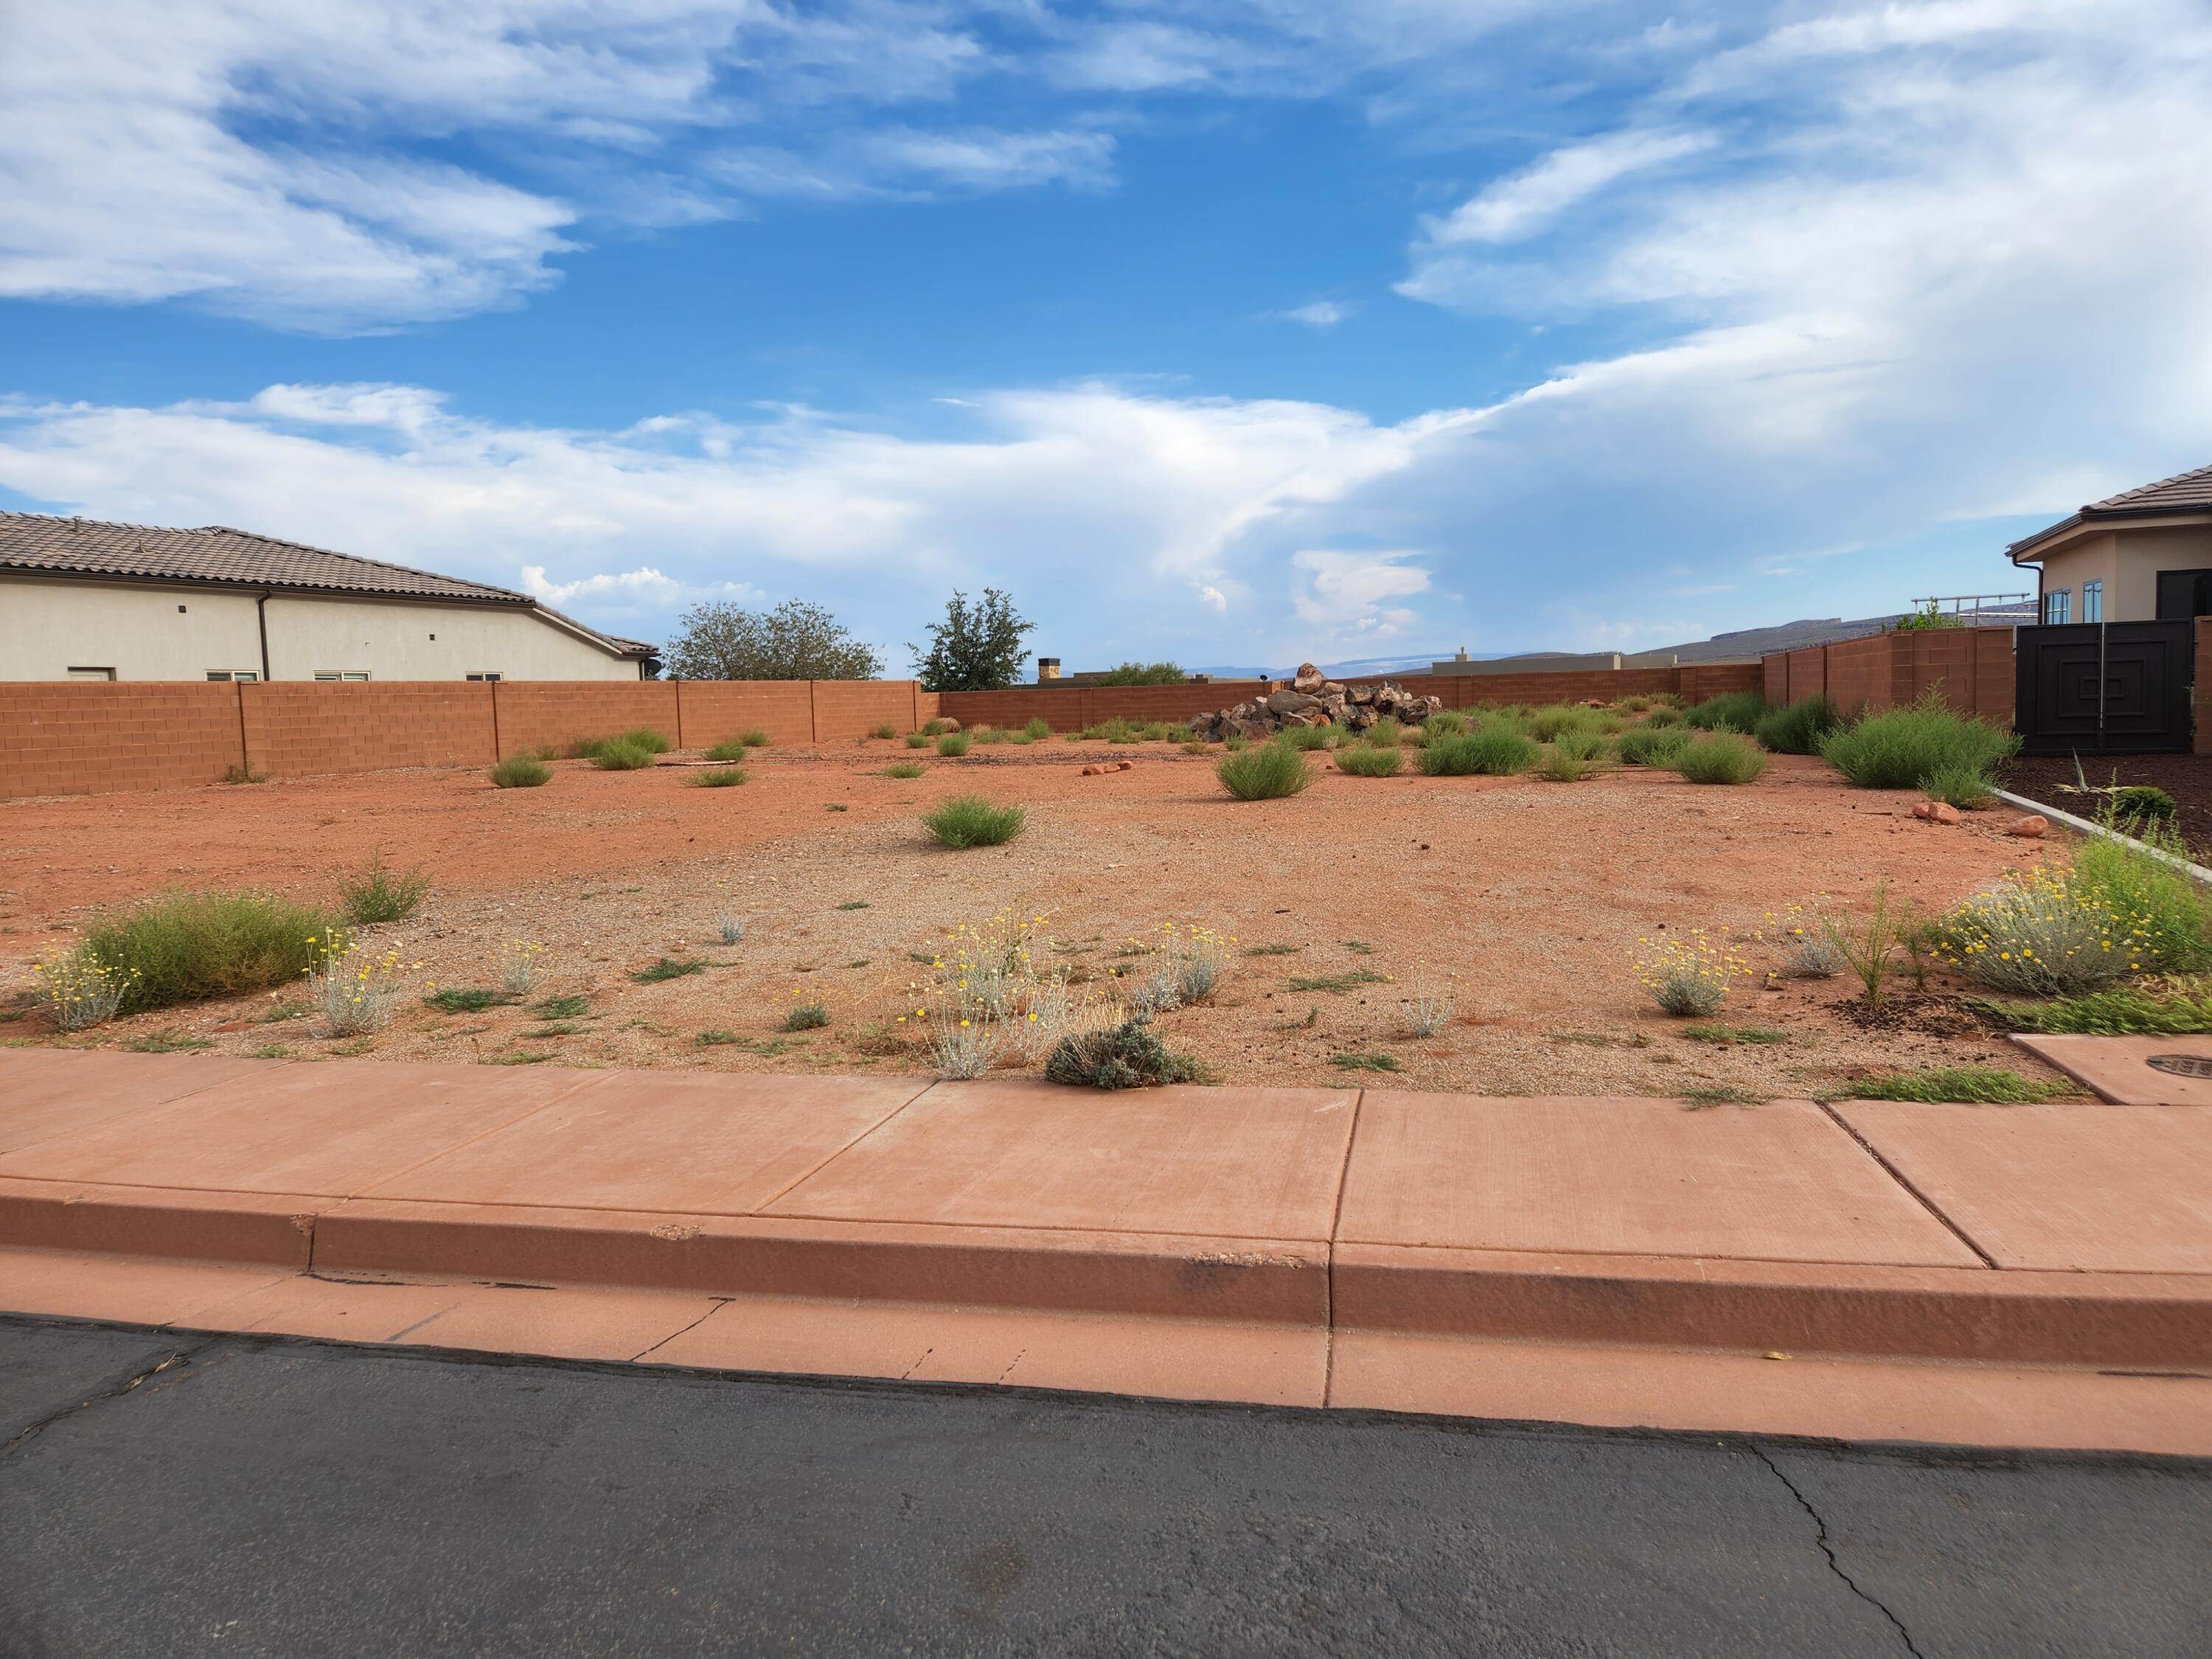 Land for Sale at lot 34 Ithica Ivins, Utah 84738 United States